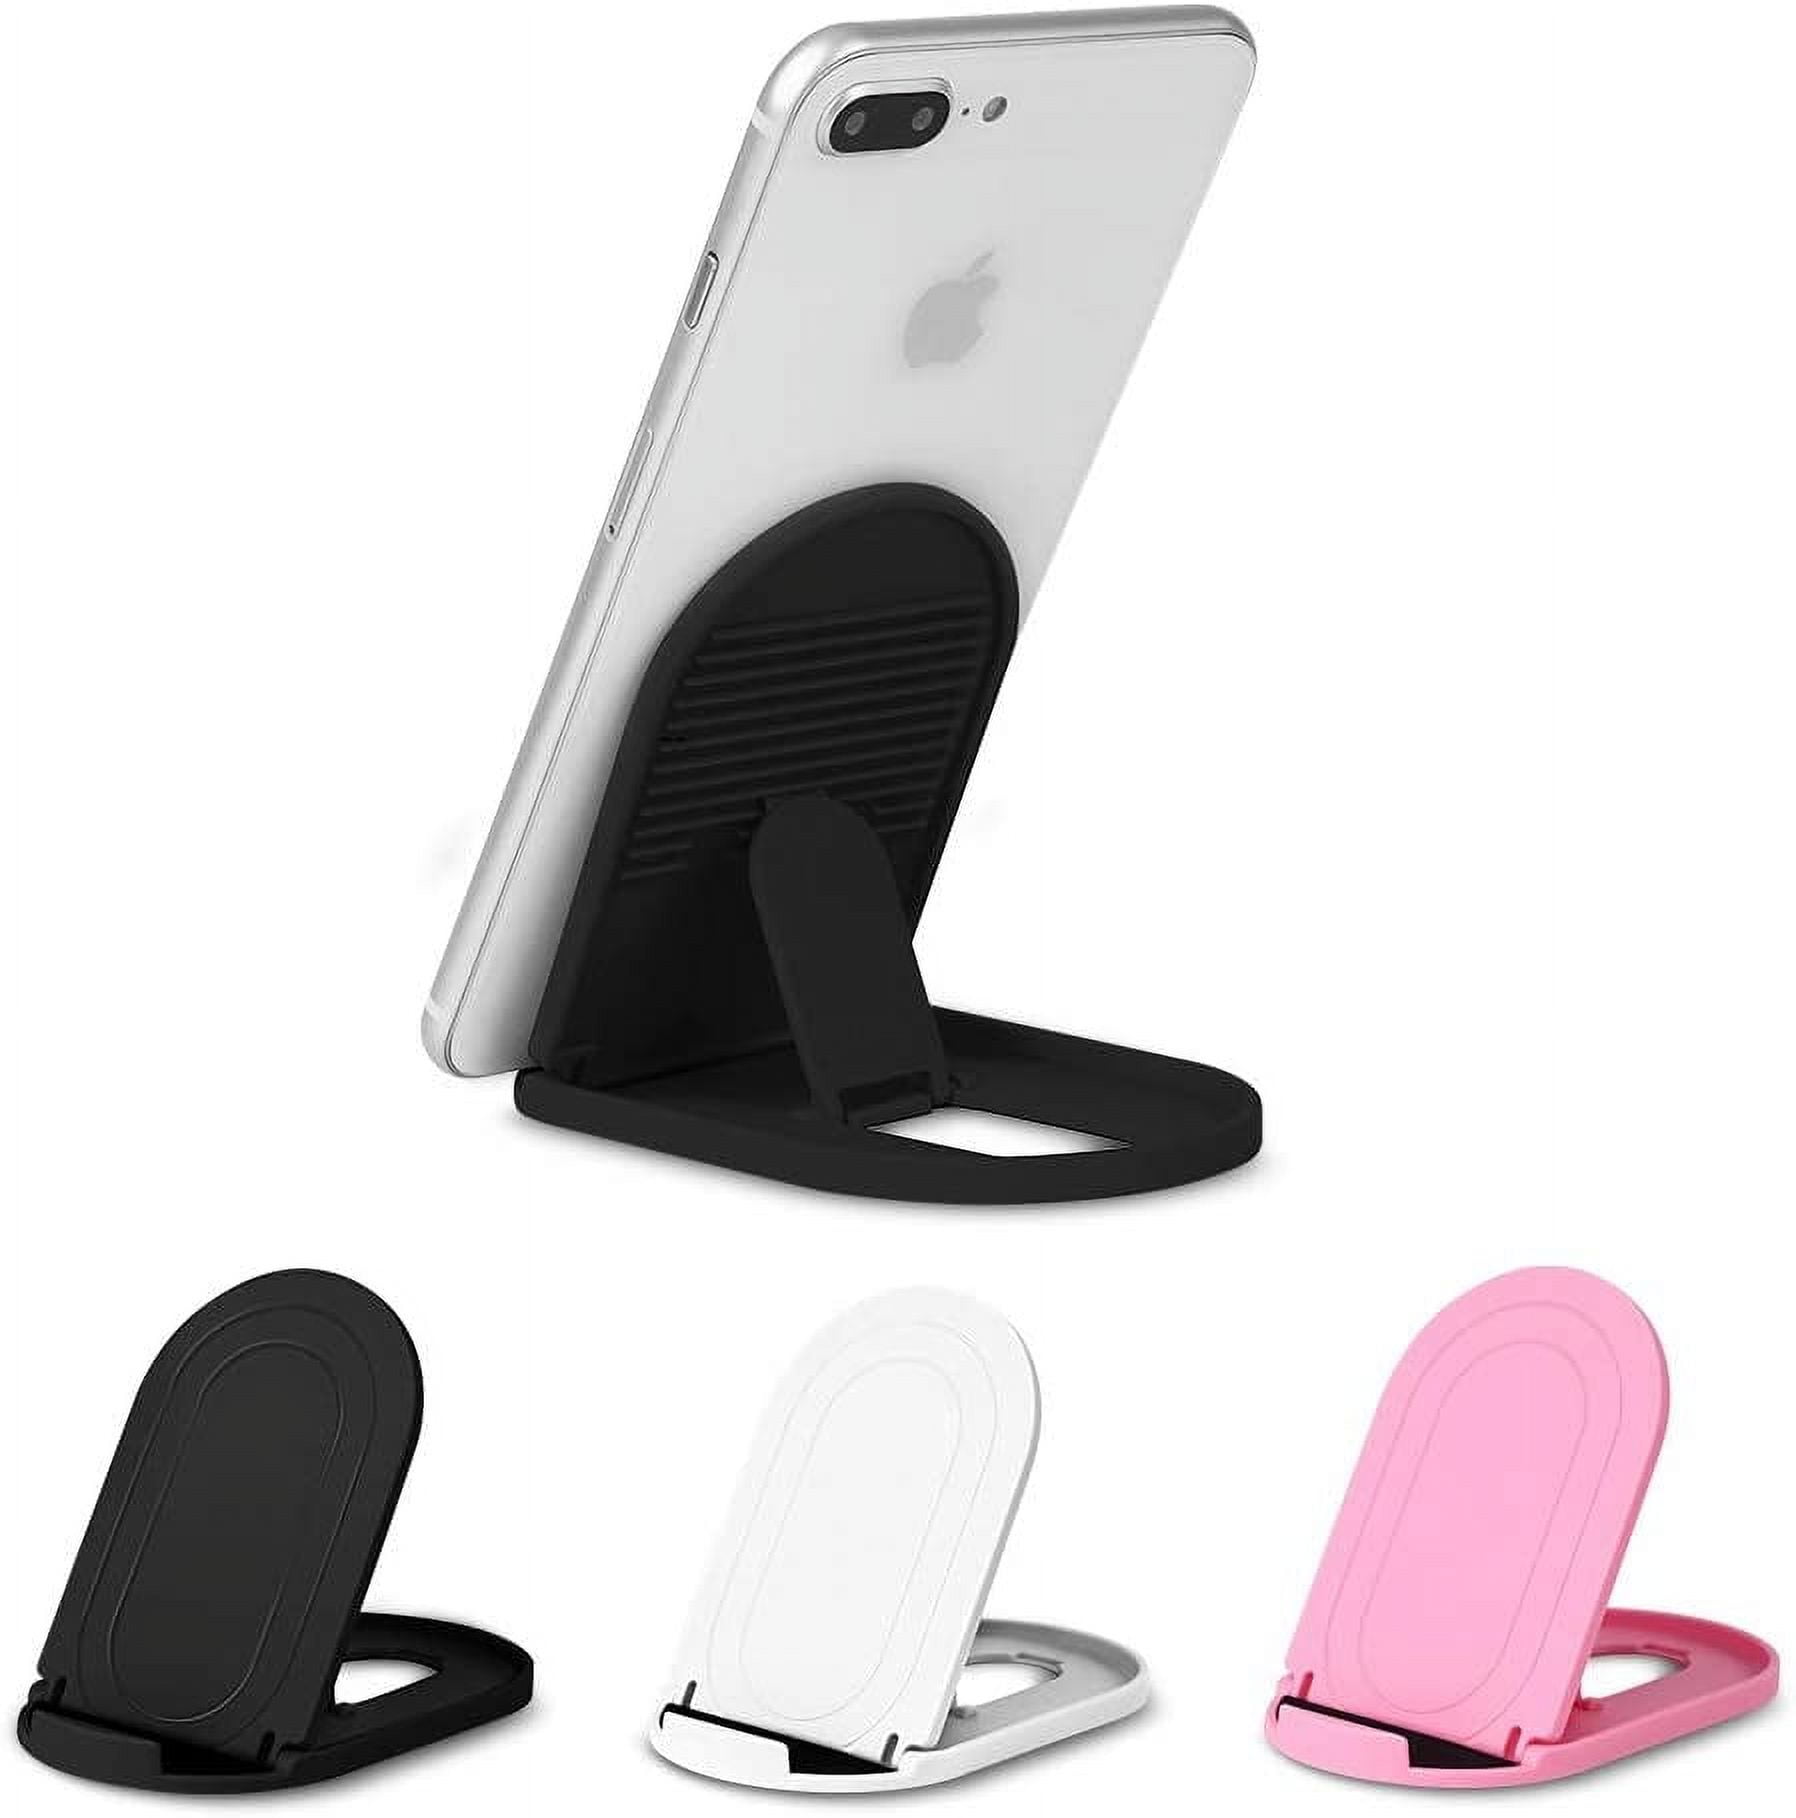 Portable Universal Foldable Mobile Phone Stand Holder For